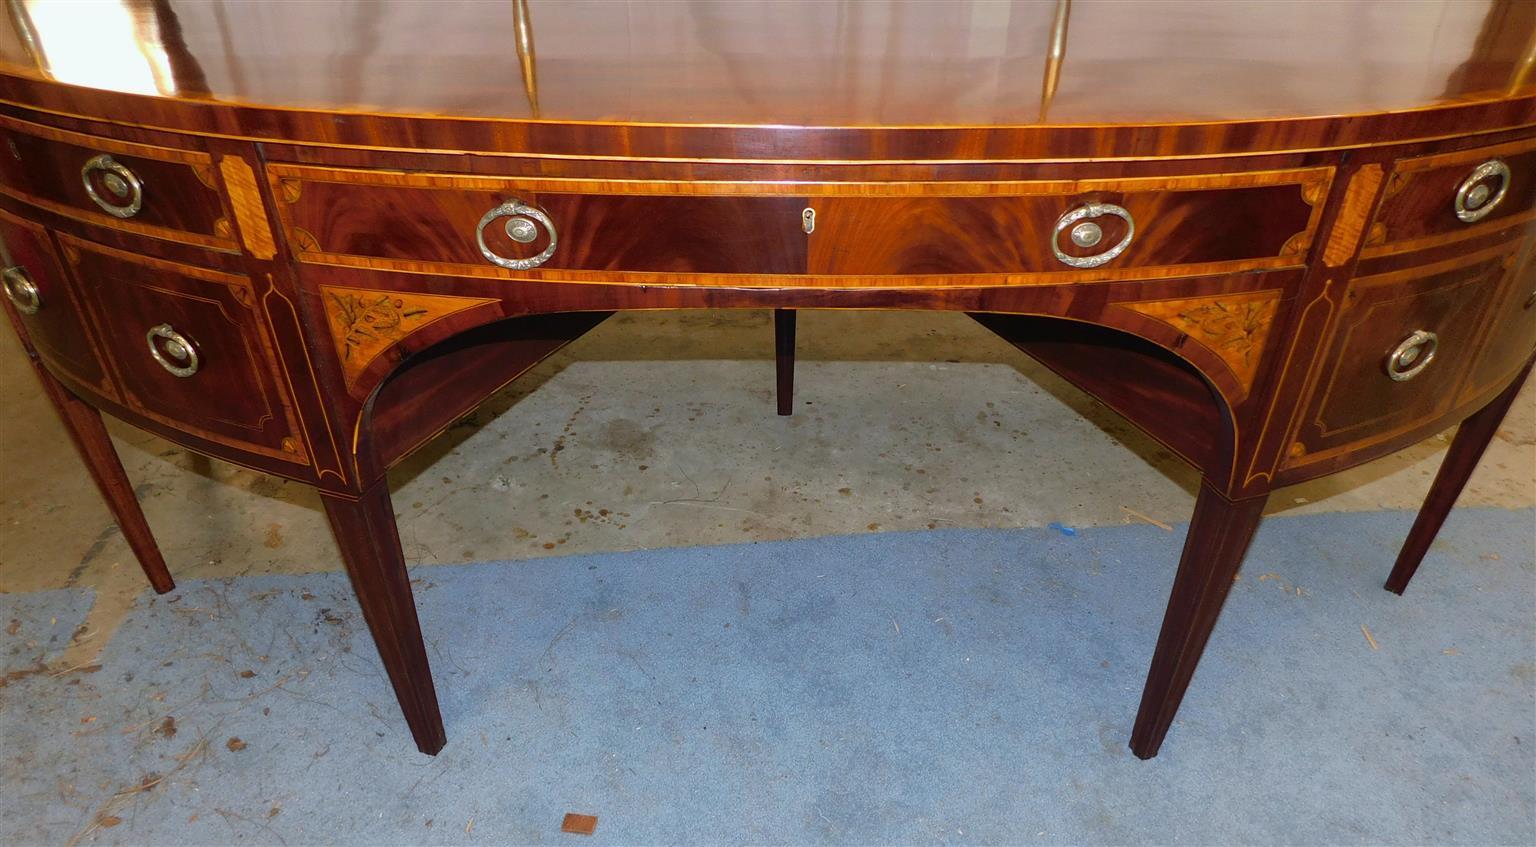 English Hepplewhite Mahogany Patera Inlaid Sideboard with Brass Gallery, C. 1770 For Sale 5